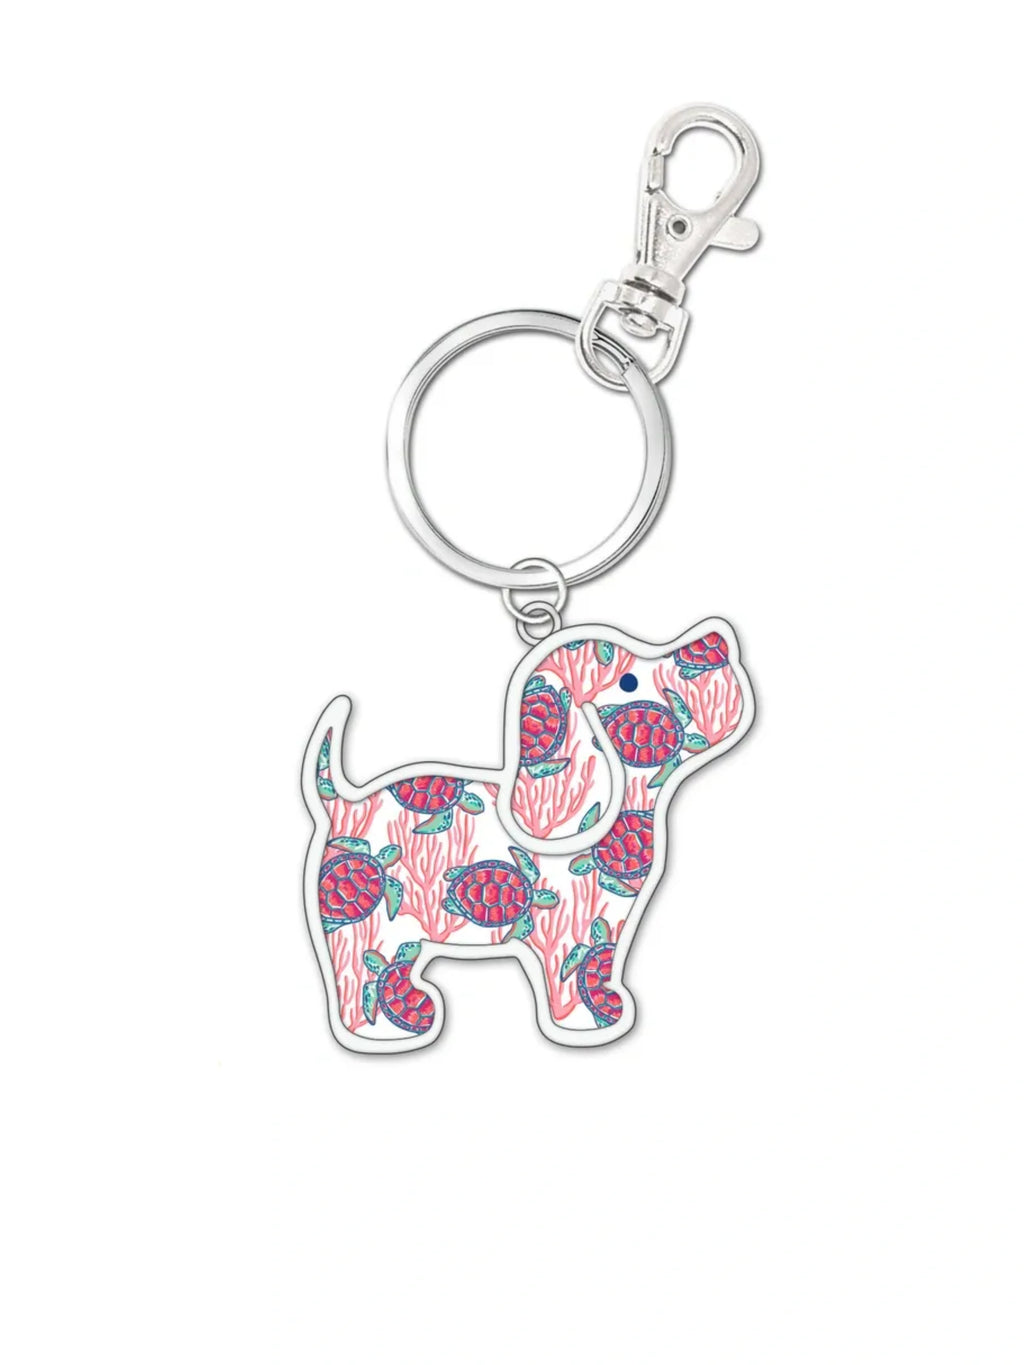 CORAL TURTLE PATTERN PUP KEY RING - Puppie Love